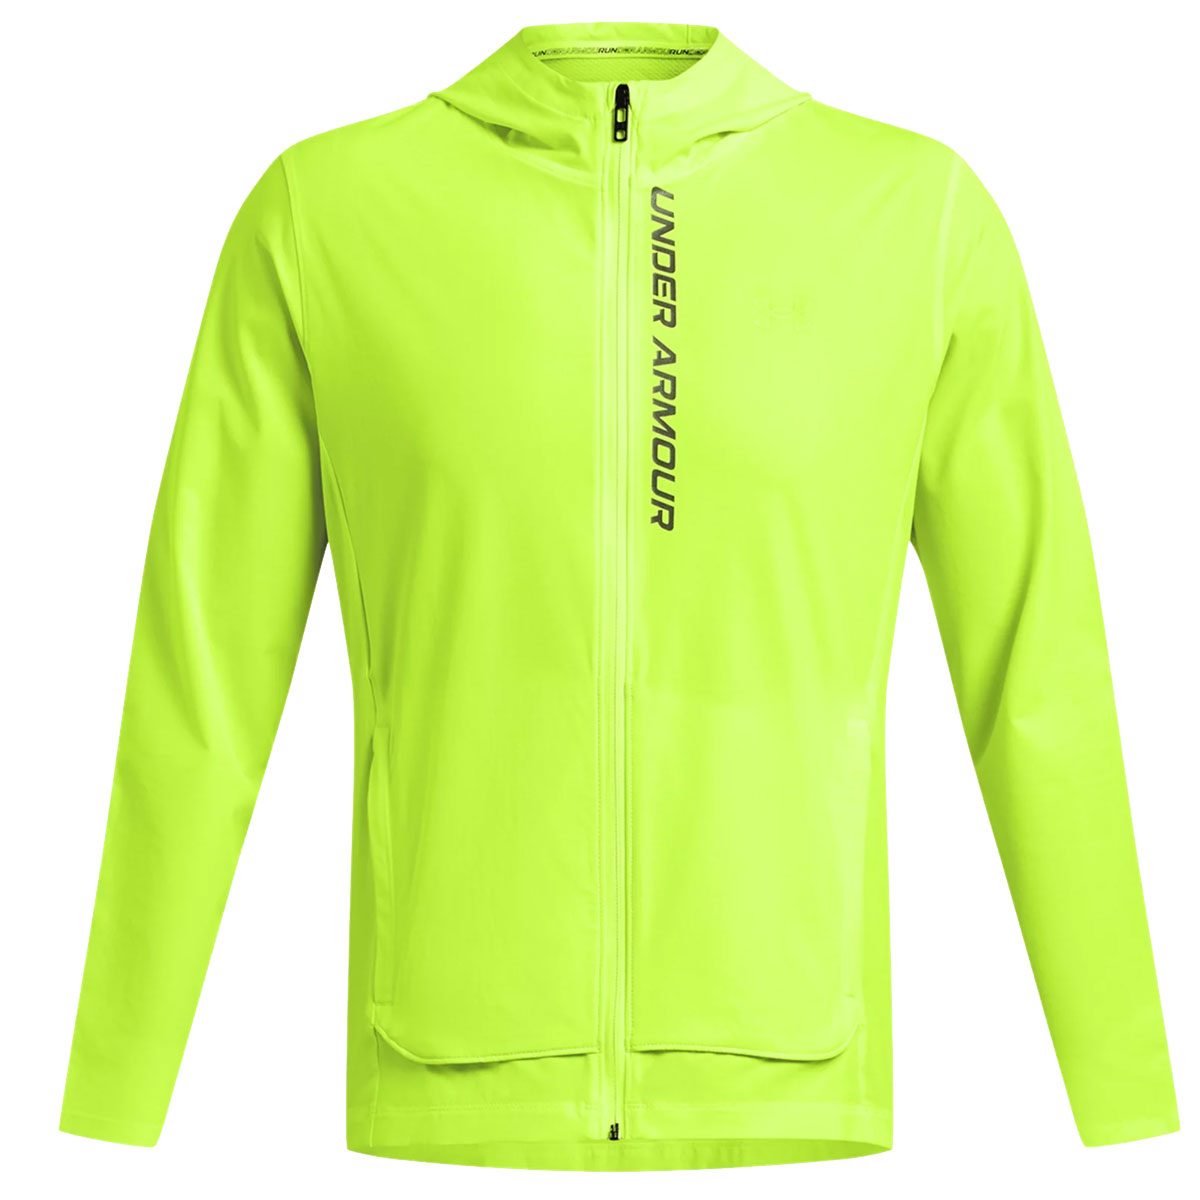 Under Armour Out Run The Storm Jacket - Mens - High Vis Yellow/Black/Reflective